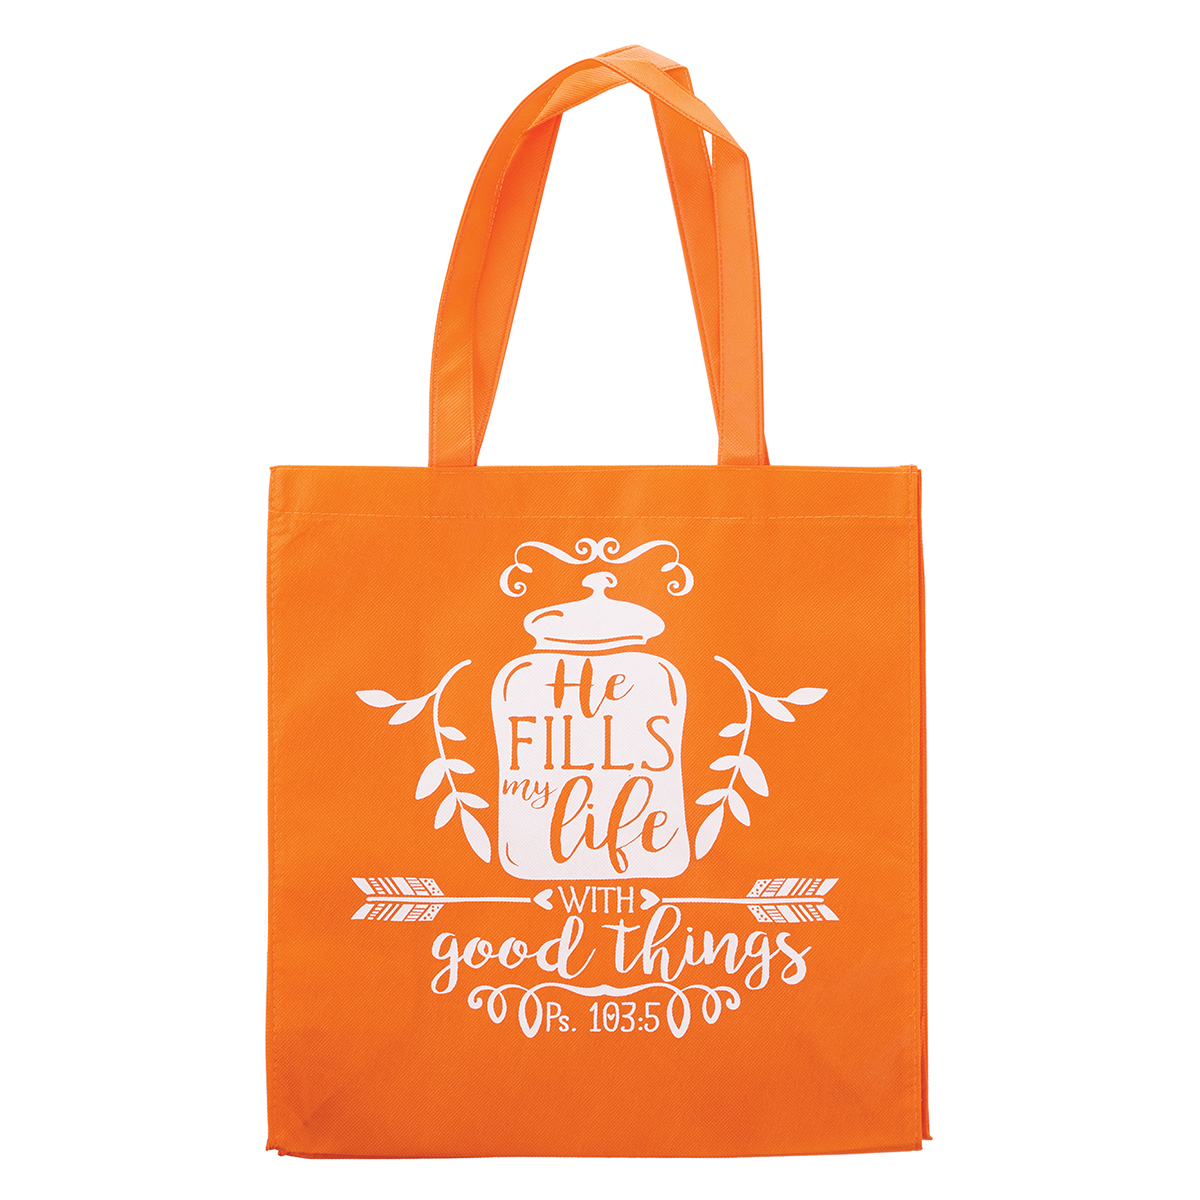 He Fills My Life Tote Bag - Psalm 103:5 | Free Delivery when you spend £10 @ www.speedy25.com